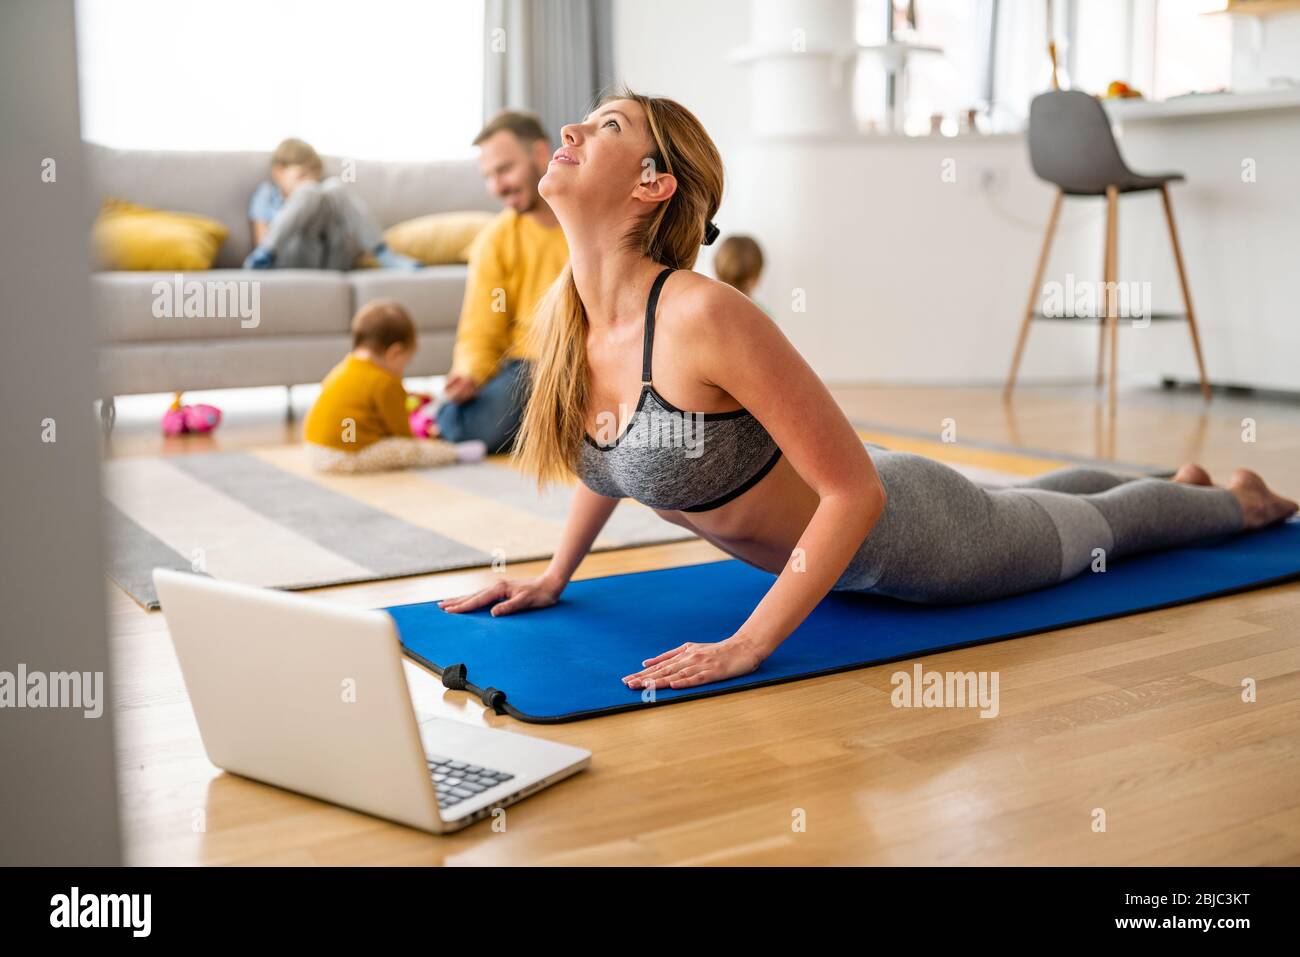 Young woman is exercising yoga at home. Fitness, workout, healthy living and diet concept. Stock Photo